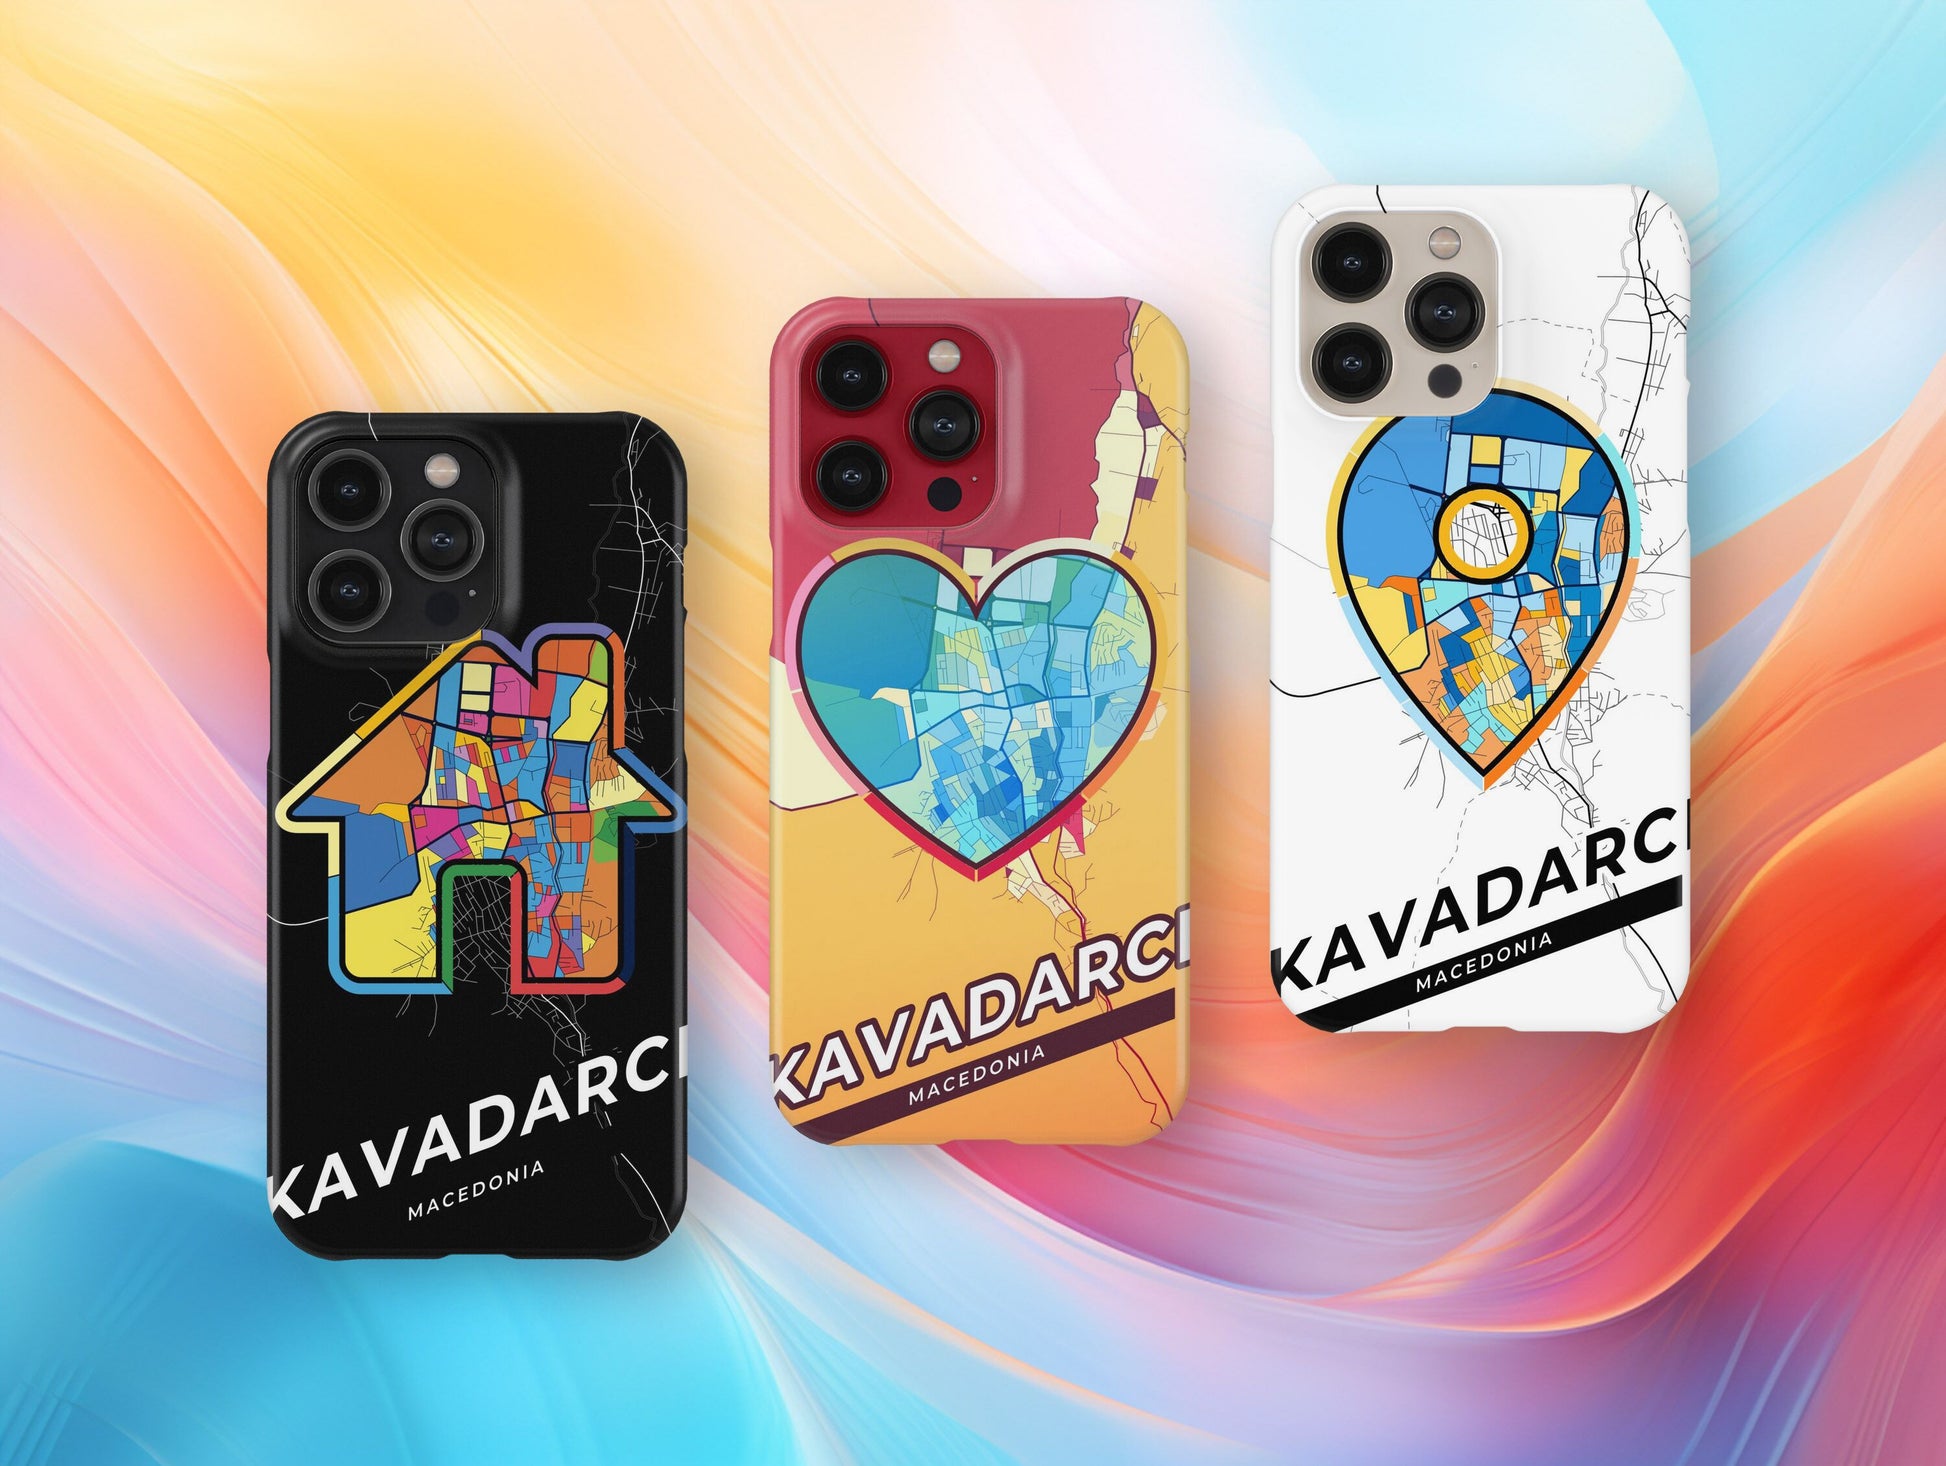 Kavadarci North Macedonia slim phone case with colorful icon. Birthday, wedding or housewarming gift. Couple match cases.